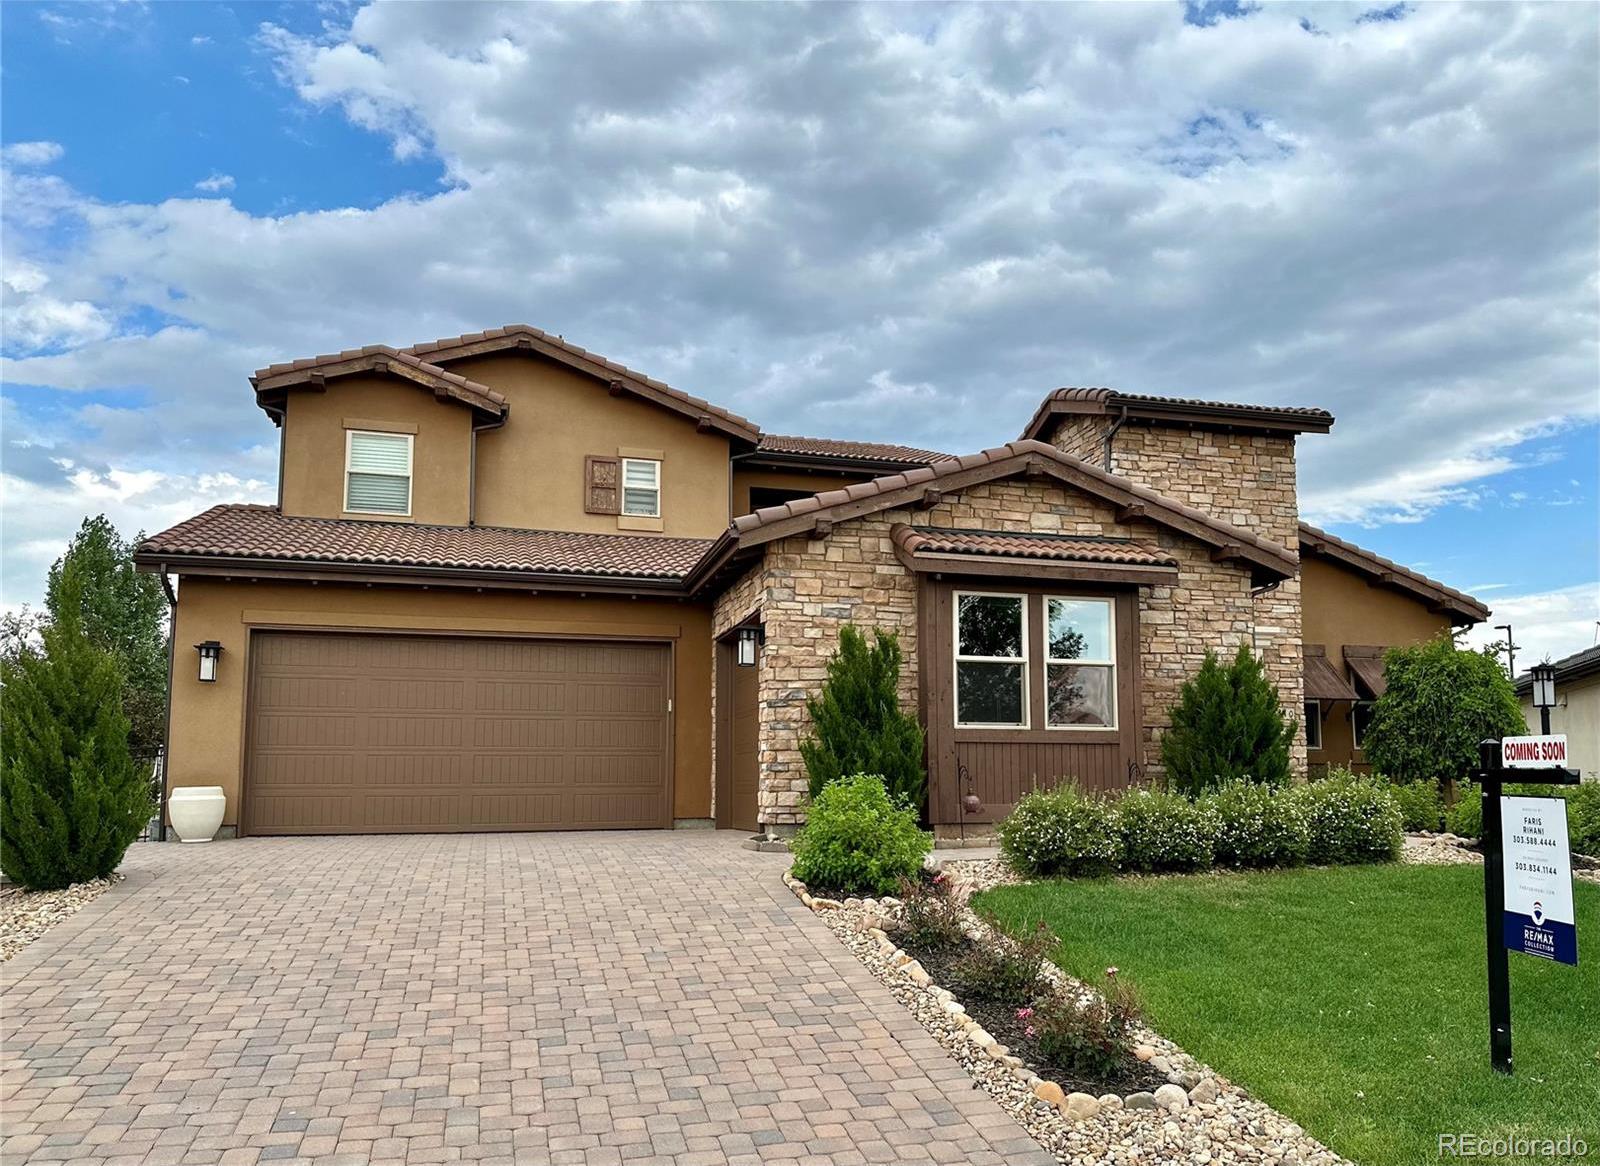 Photo one of 9310 E Winding Hill Ave Lone Tree CO 80124 | MLS 9304371